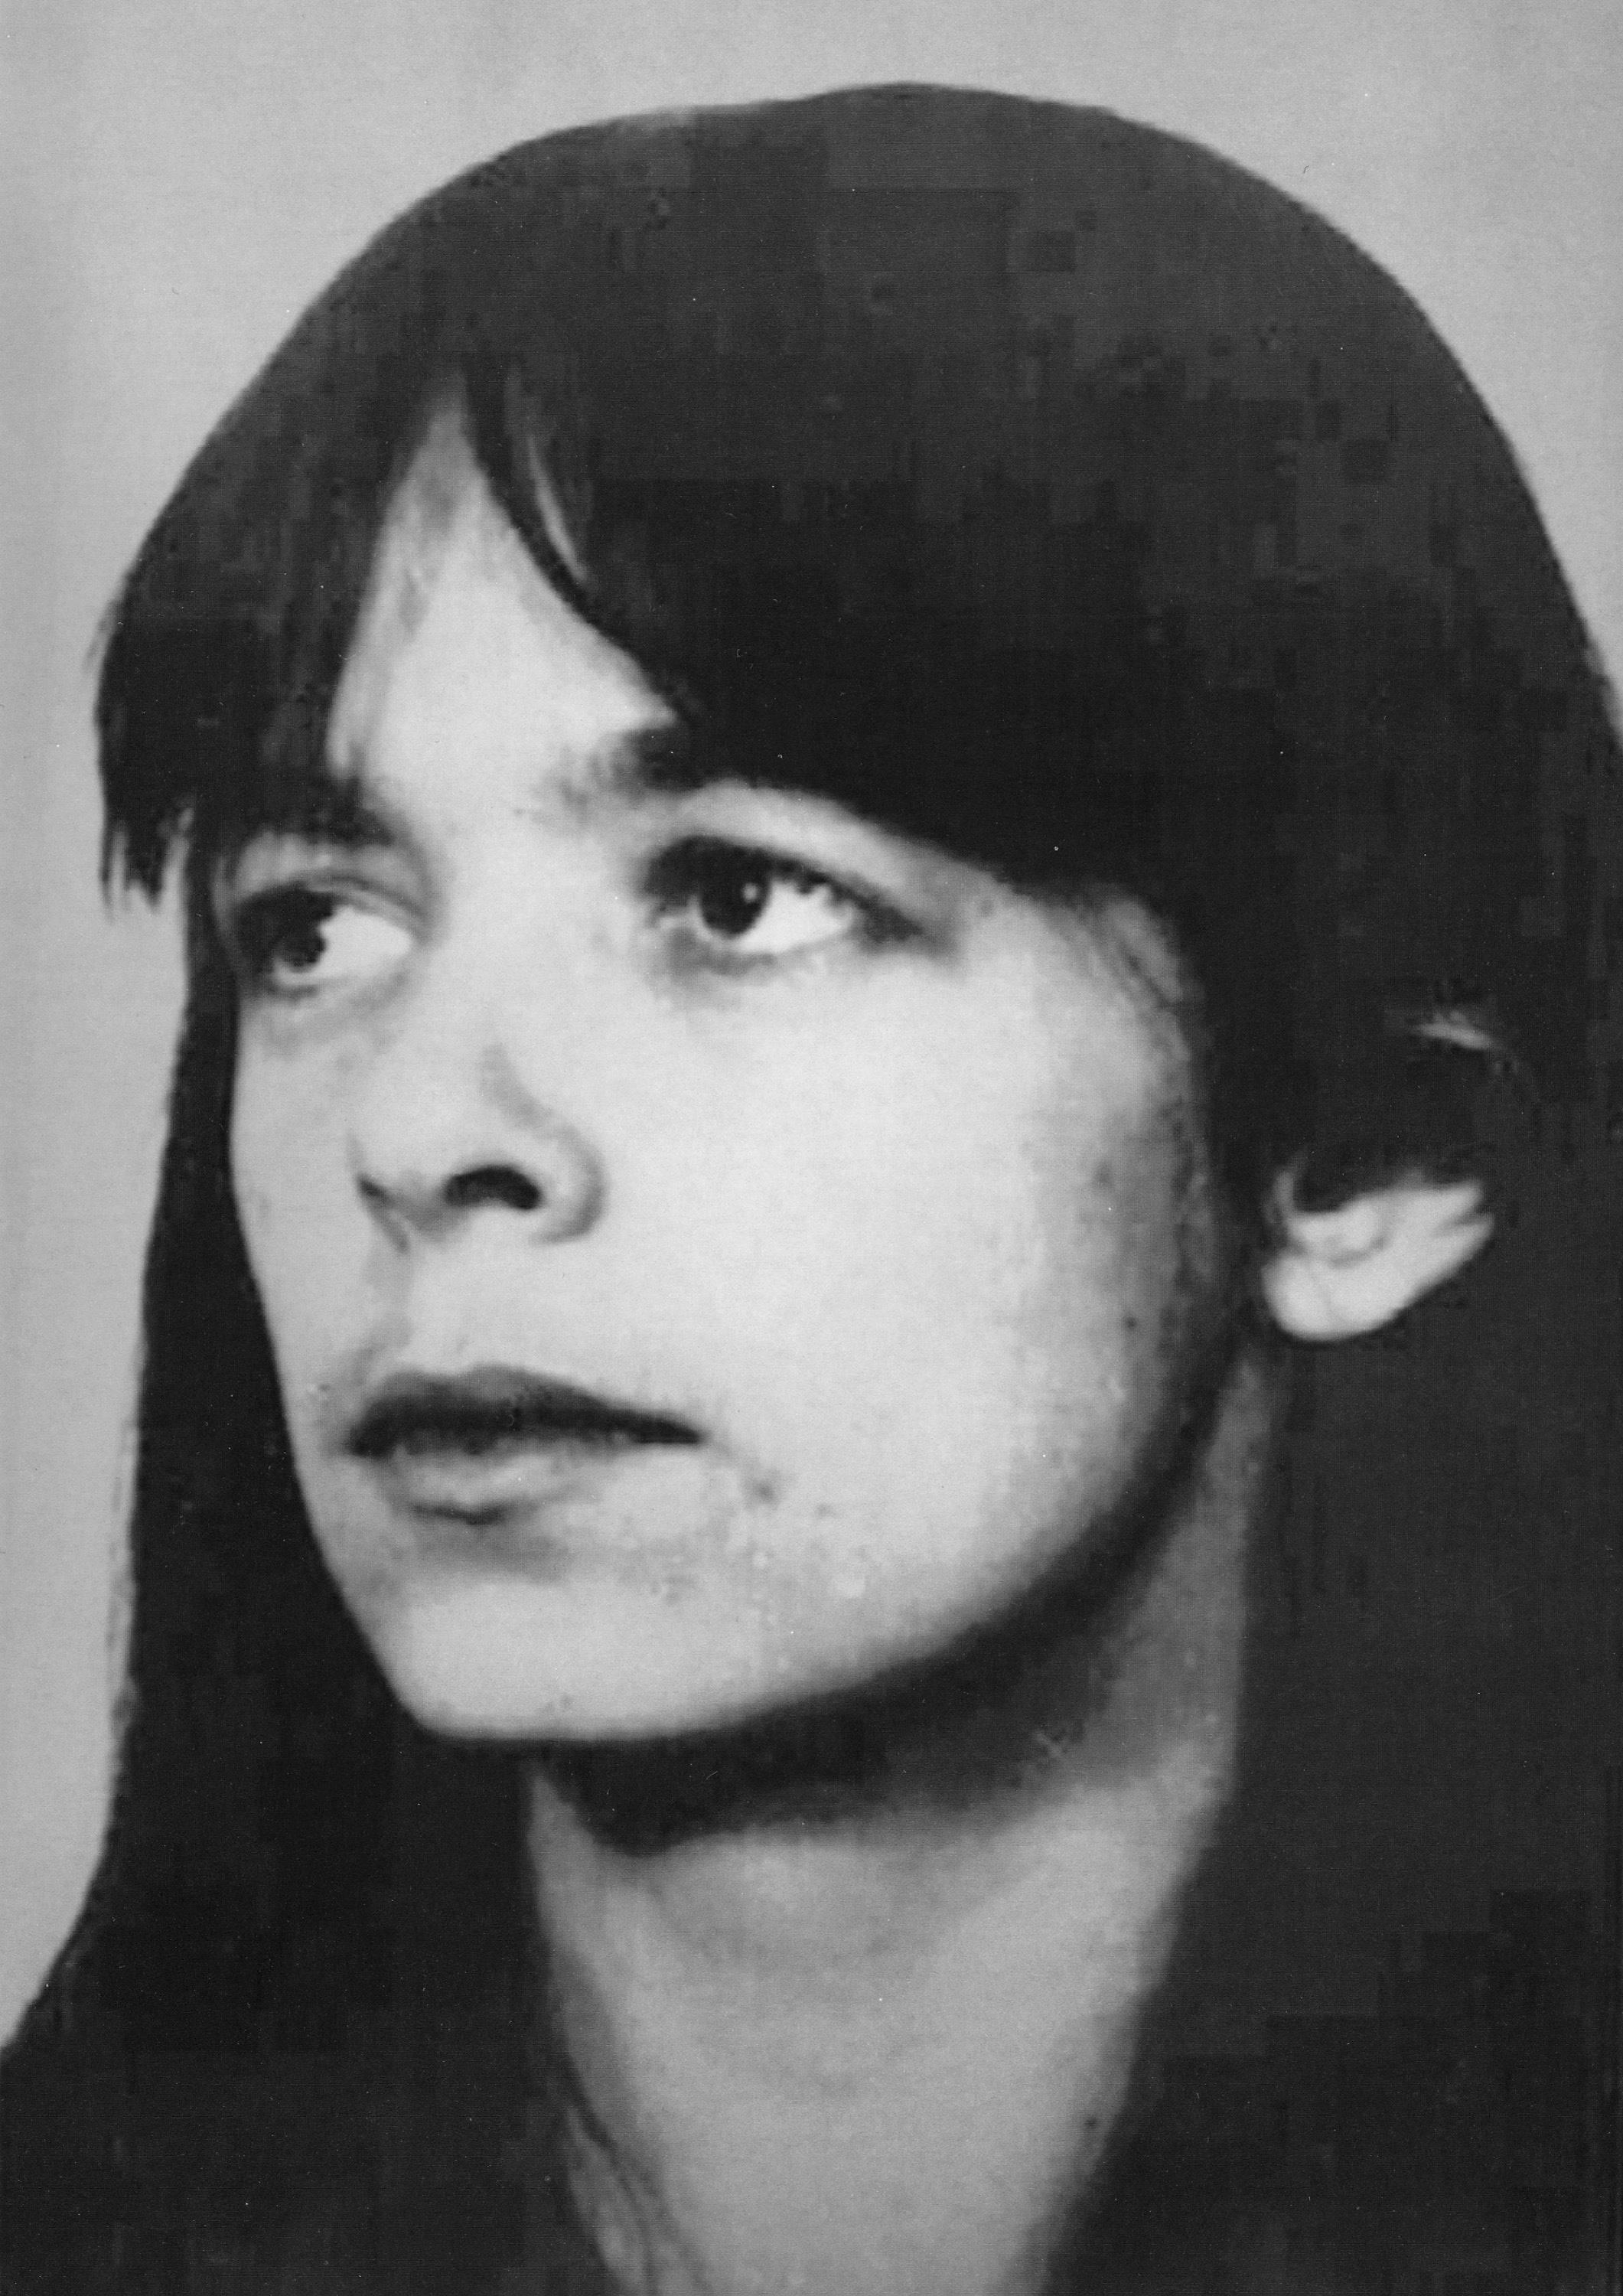 A 1988 portrait of RAF (Red Army Faction) member Daniela Klette, handed out by German police in 1993